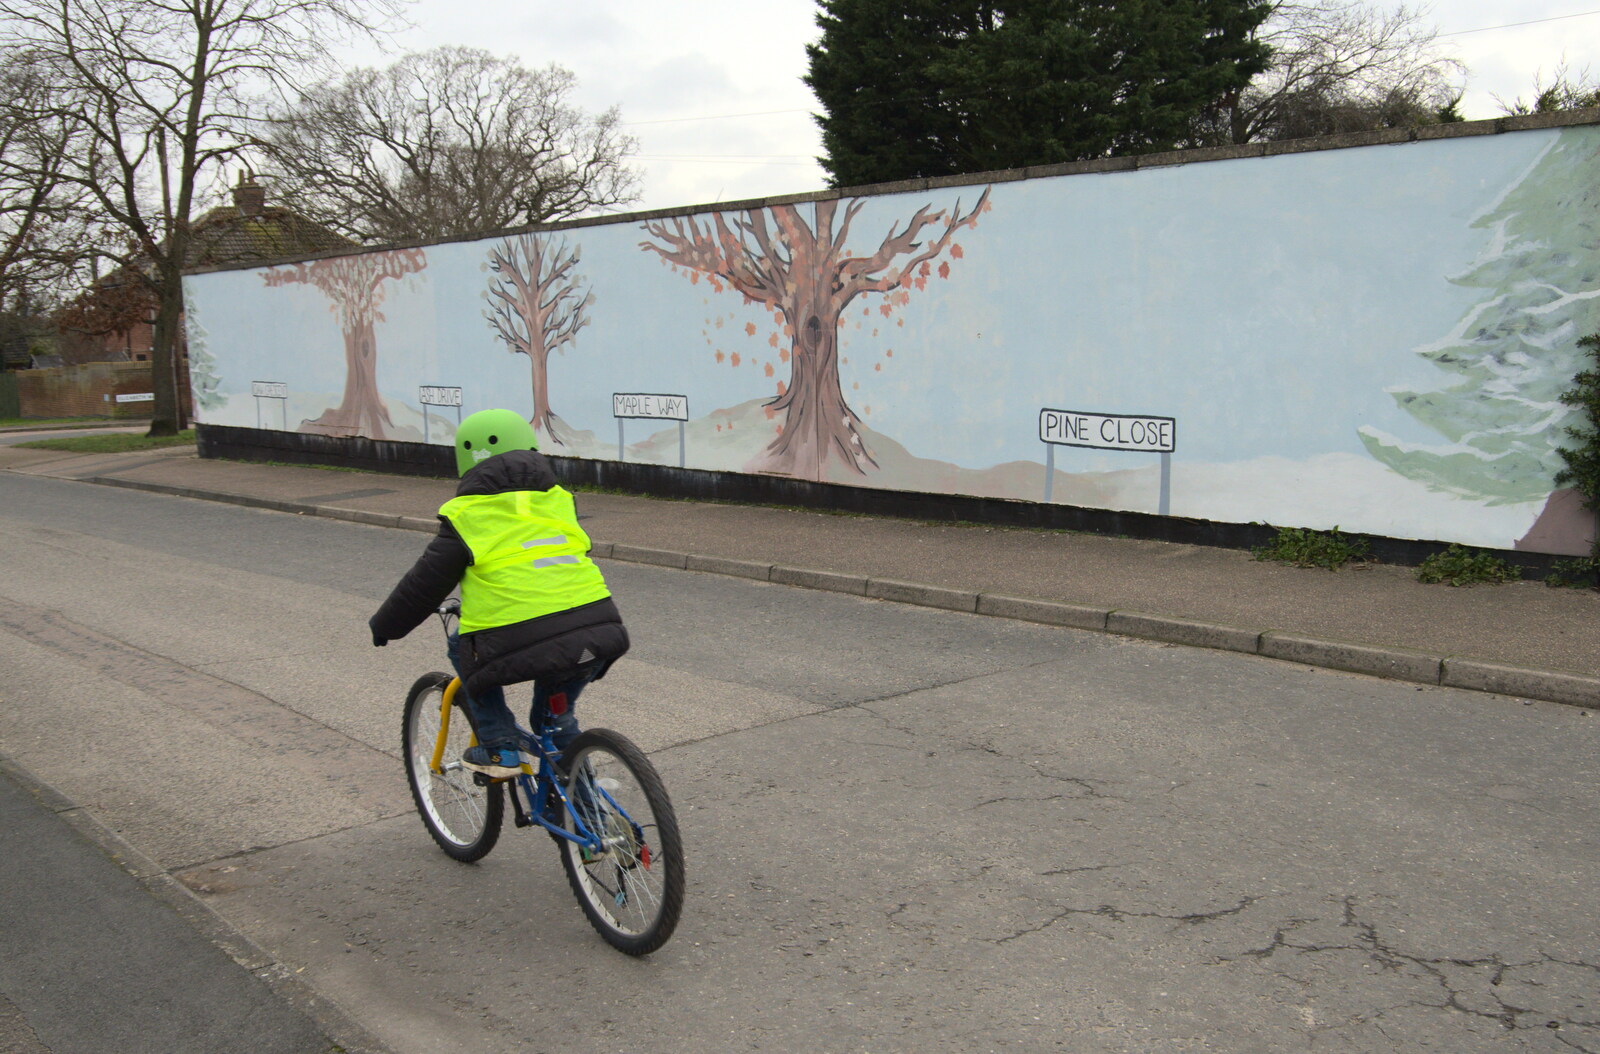 Fred cycles past the Tree mural from A Trip to the Blue Shop, Church Street, Eye, Suffolk - 2nd February 2021